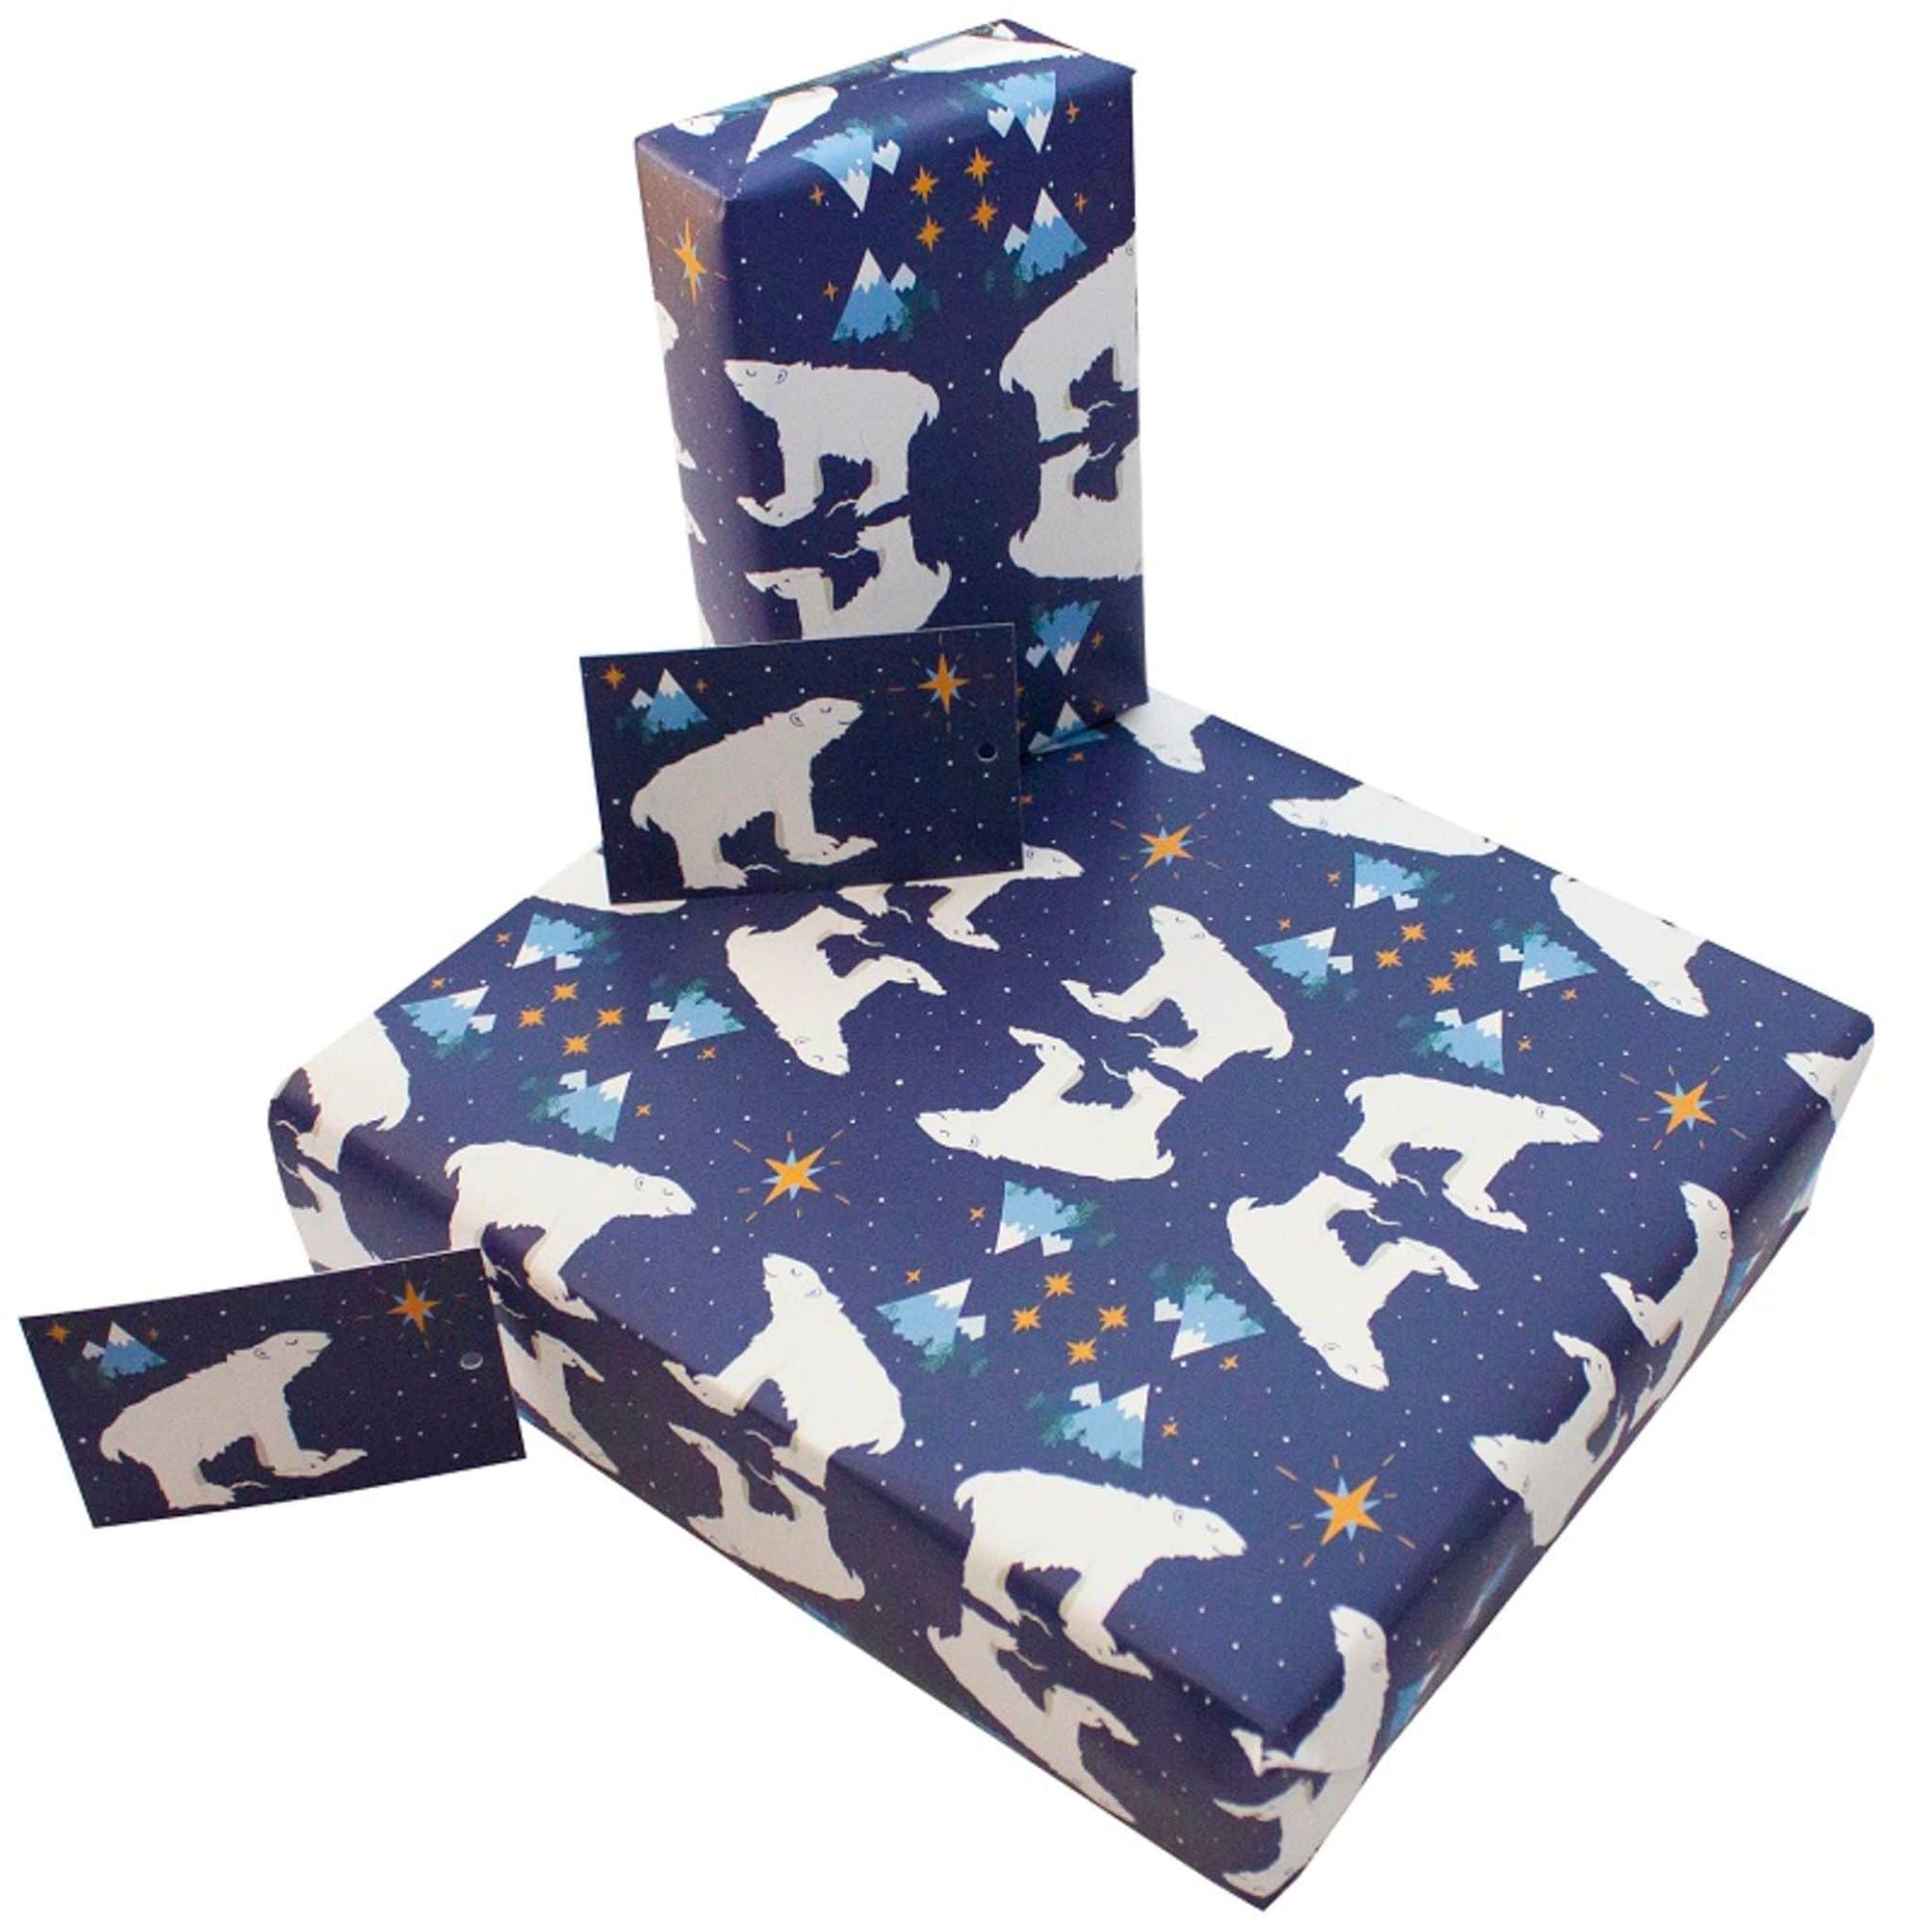 Recycled Christmas wrapping paper - polar bears